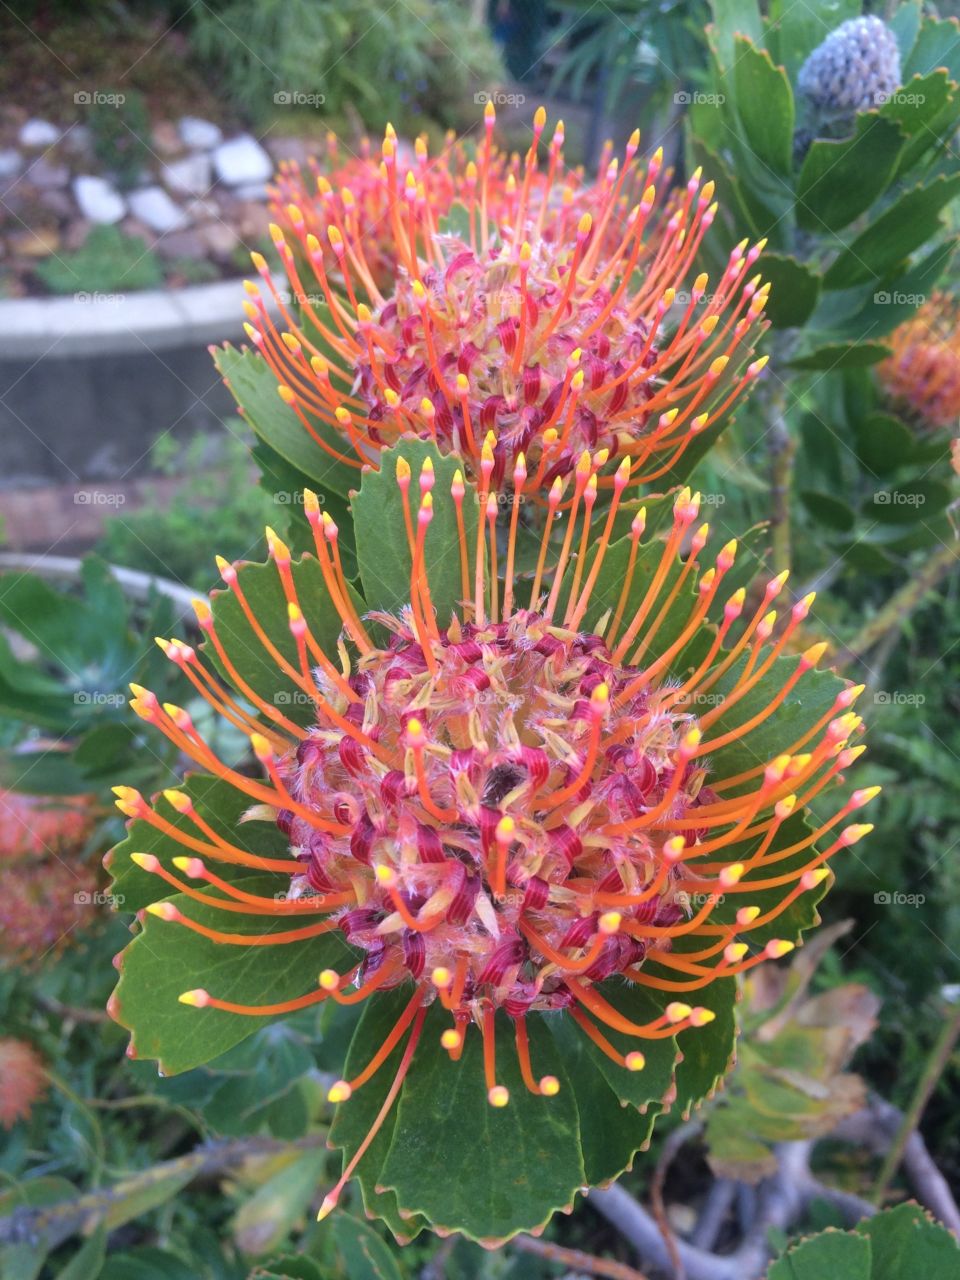 Pincushion Protea flowers in full bloom in Winter at Kirstenbosch Botanical garden in Cape Town South Africa 